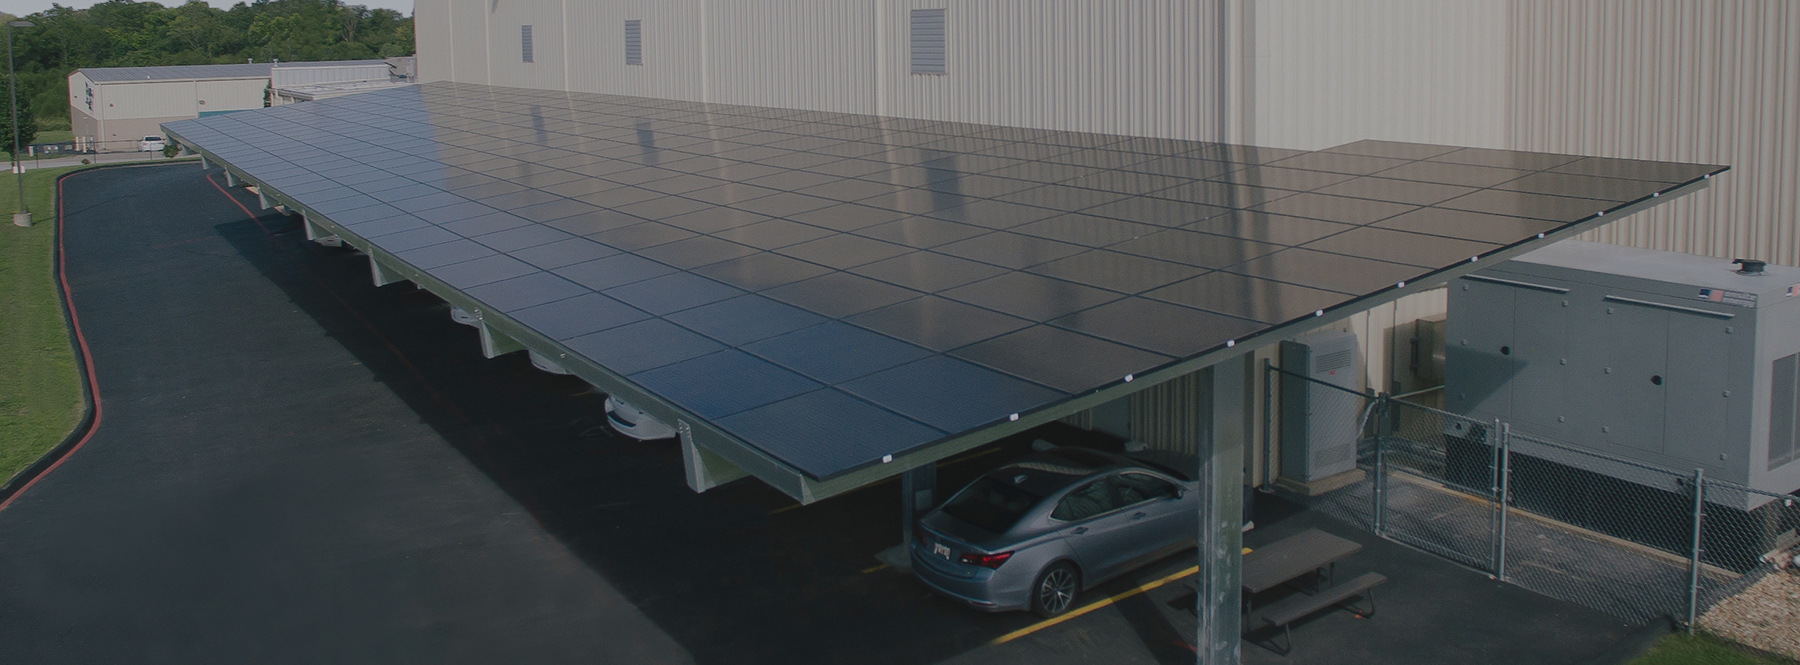 Large, metal carport with solar panels mounted to the roof next to a large, tan aluminum building.